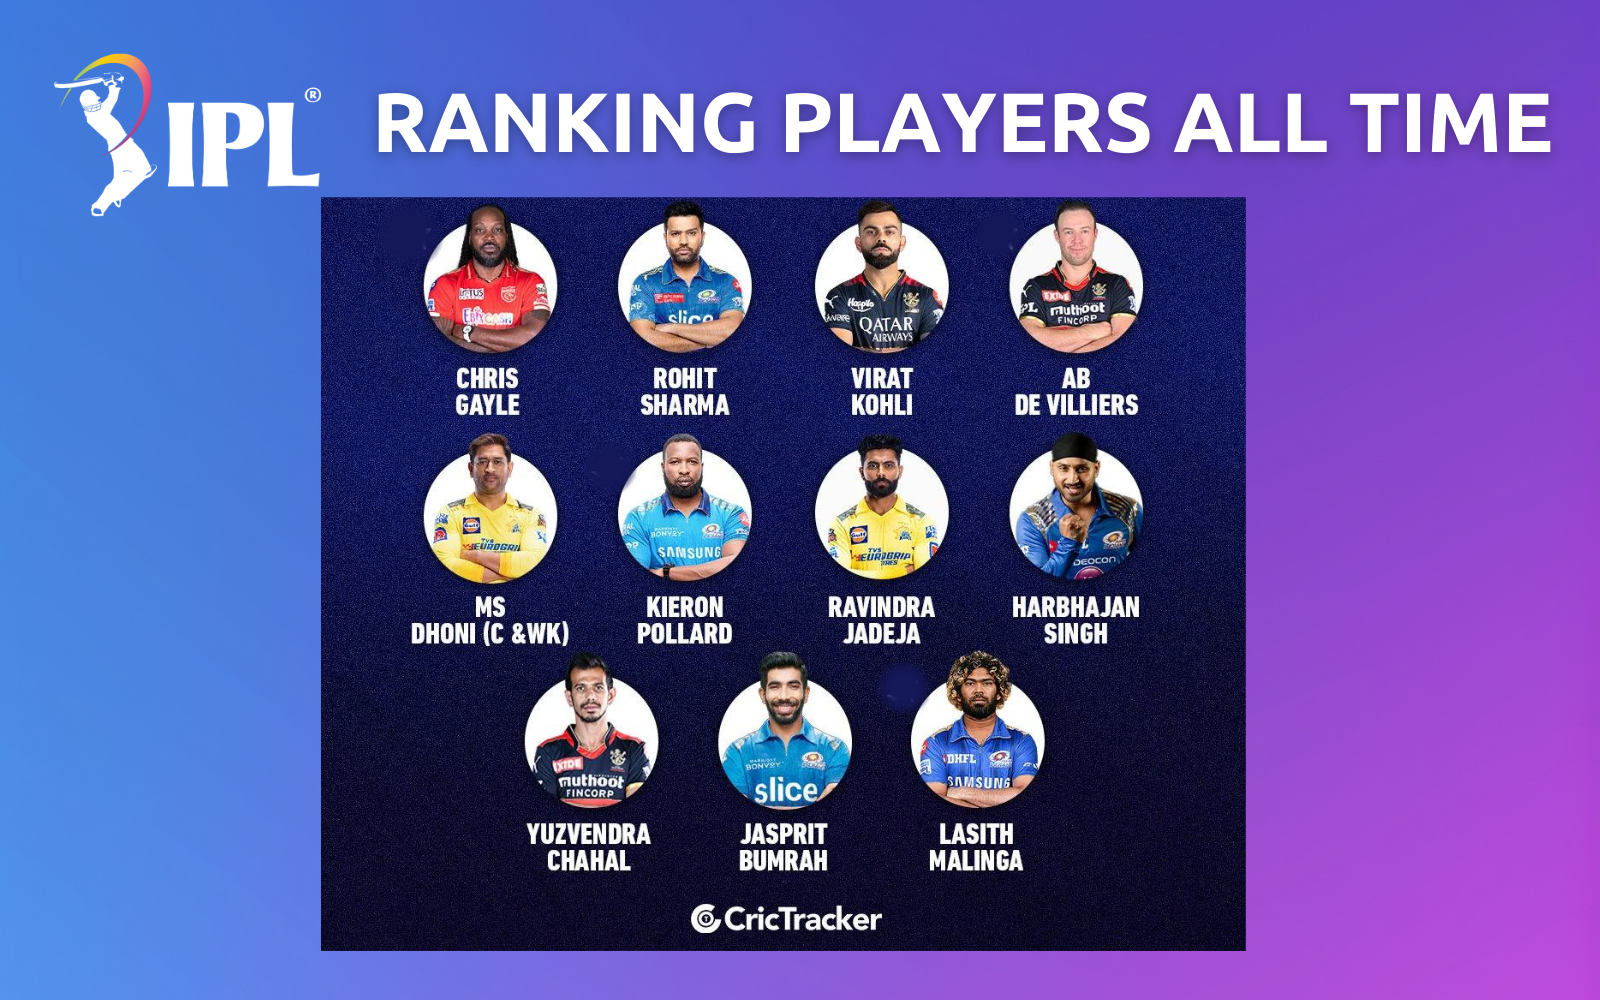 IPL Ranking Players All Time